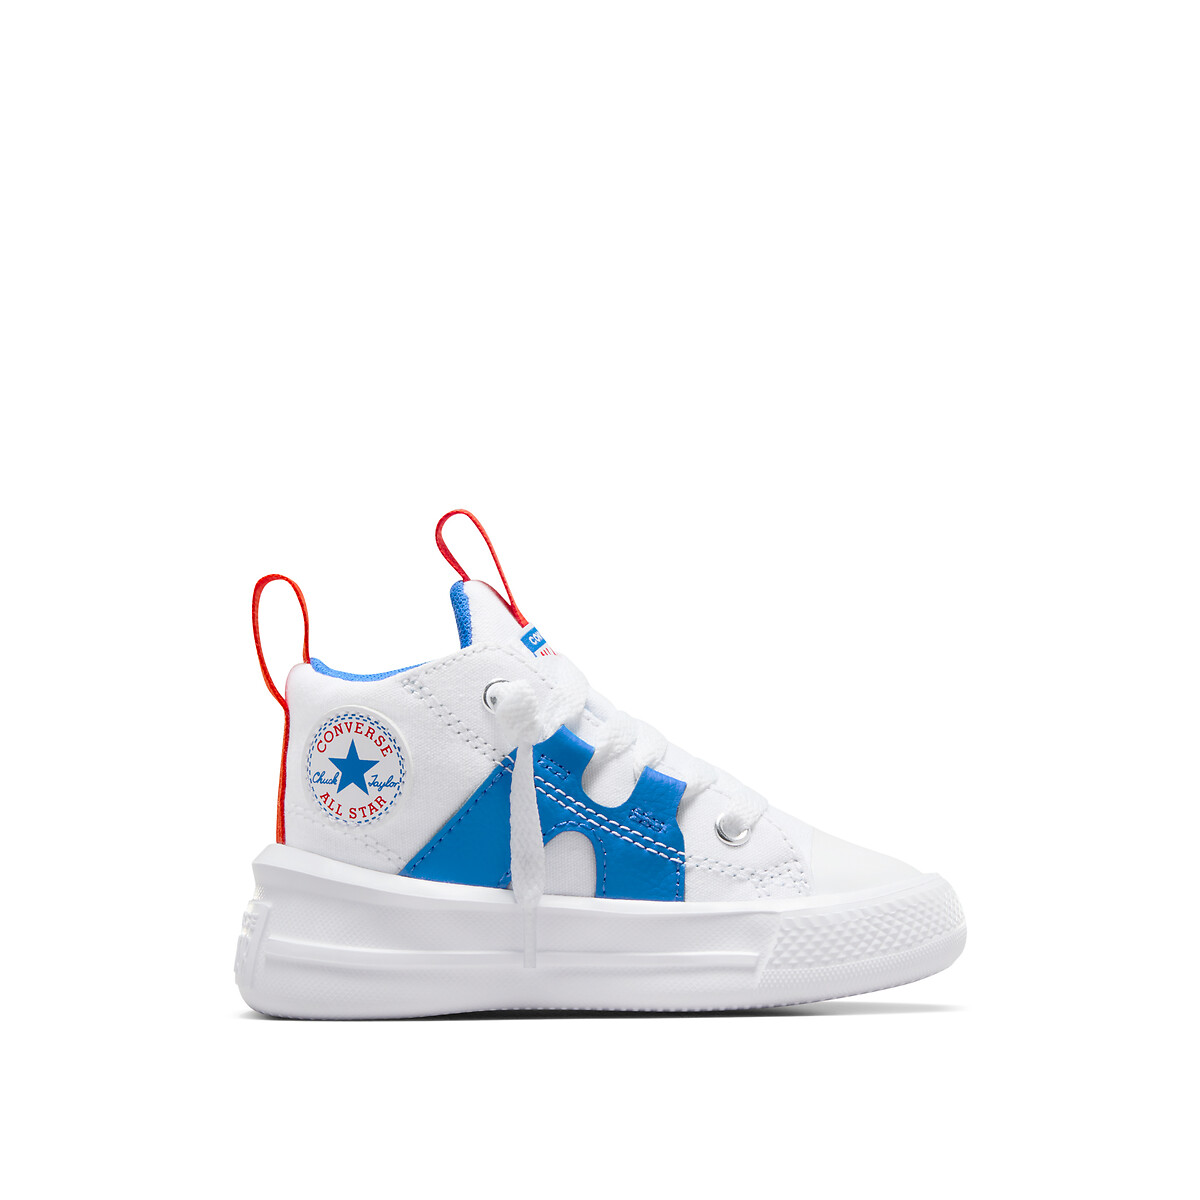 Kids’ All Star Ultra Retro Sport High Top Trainers in Canvas